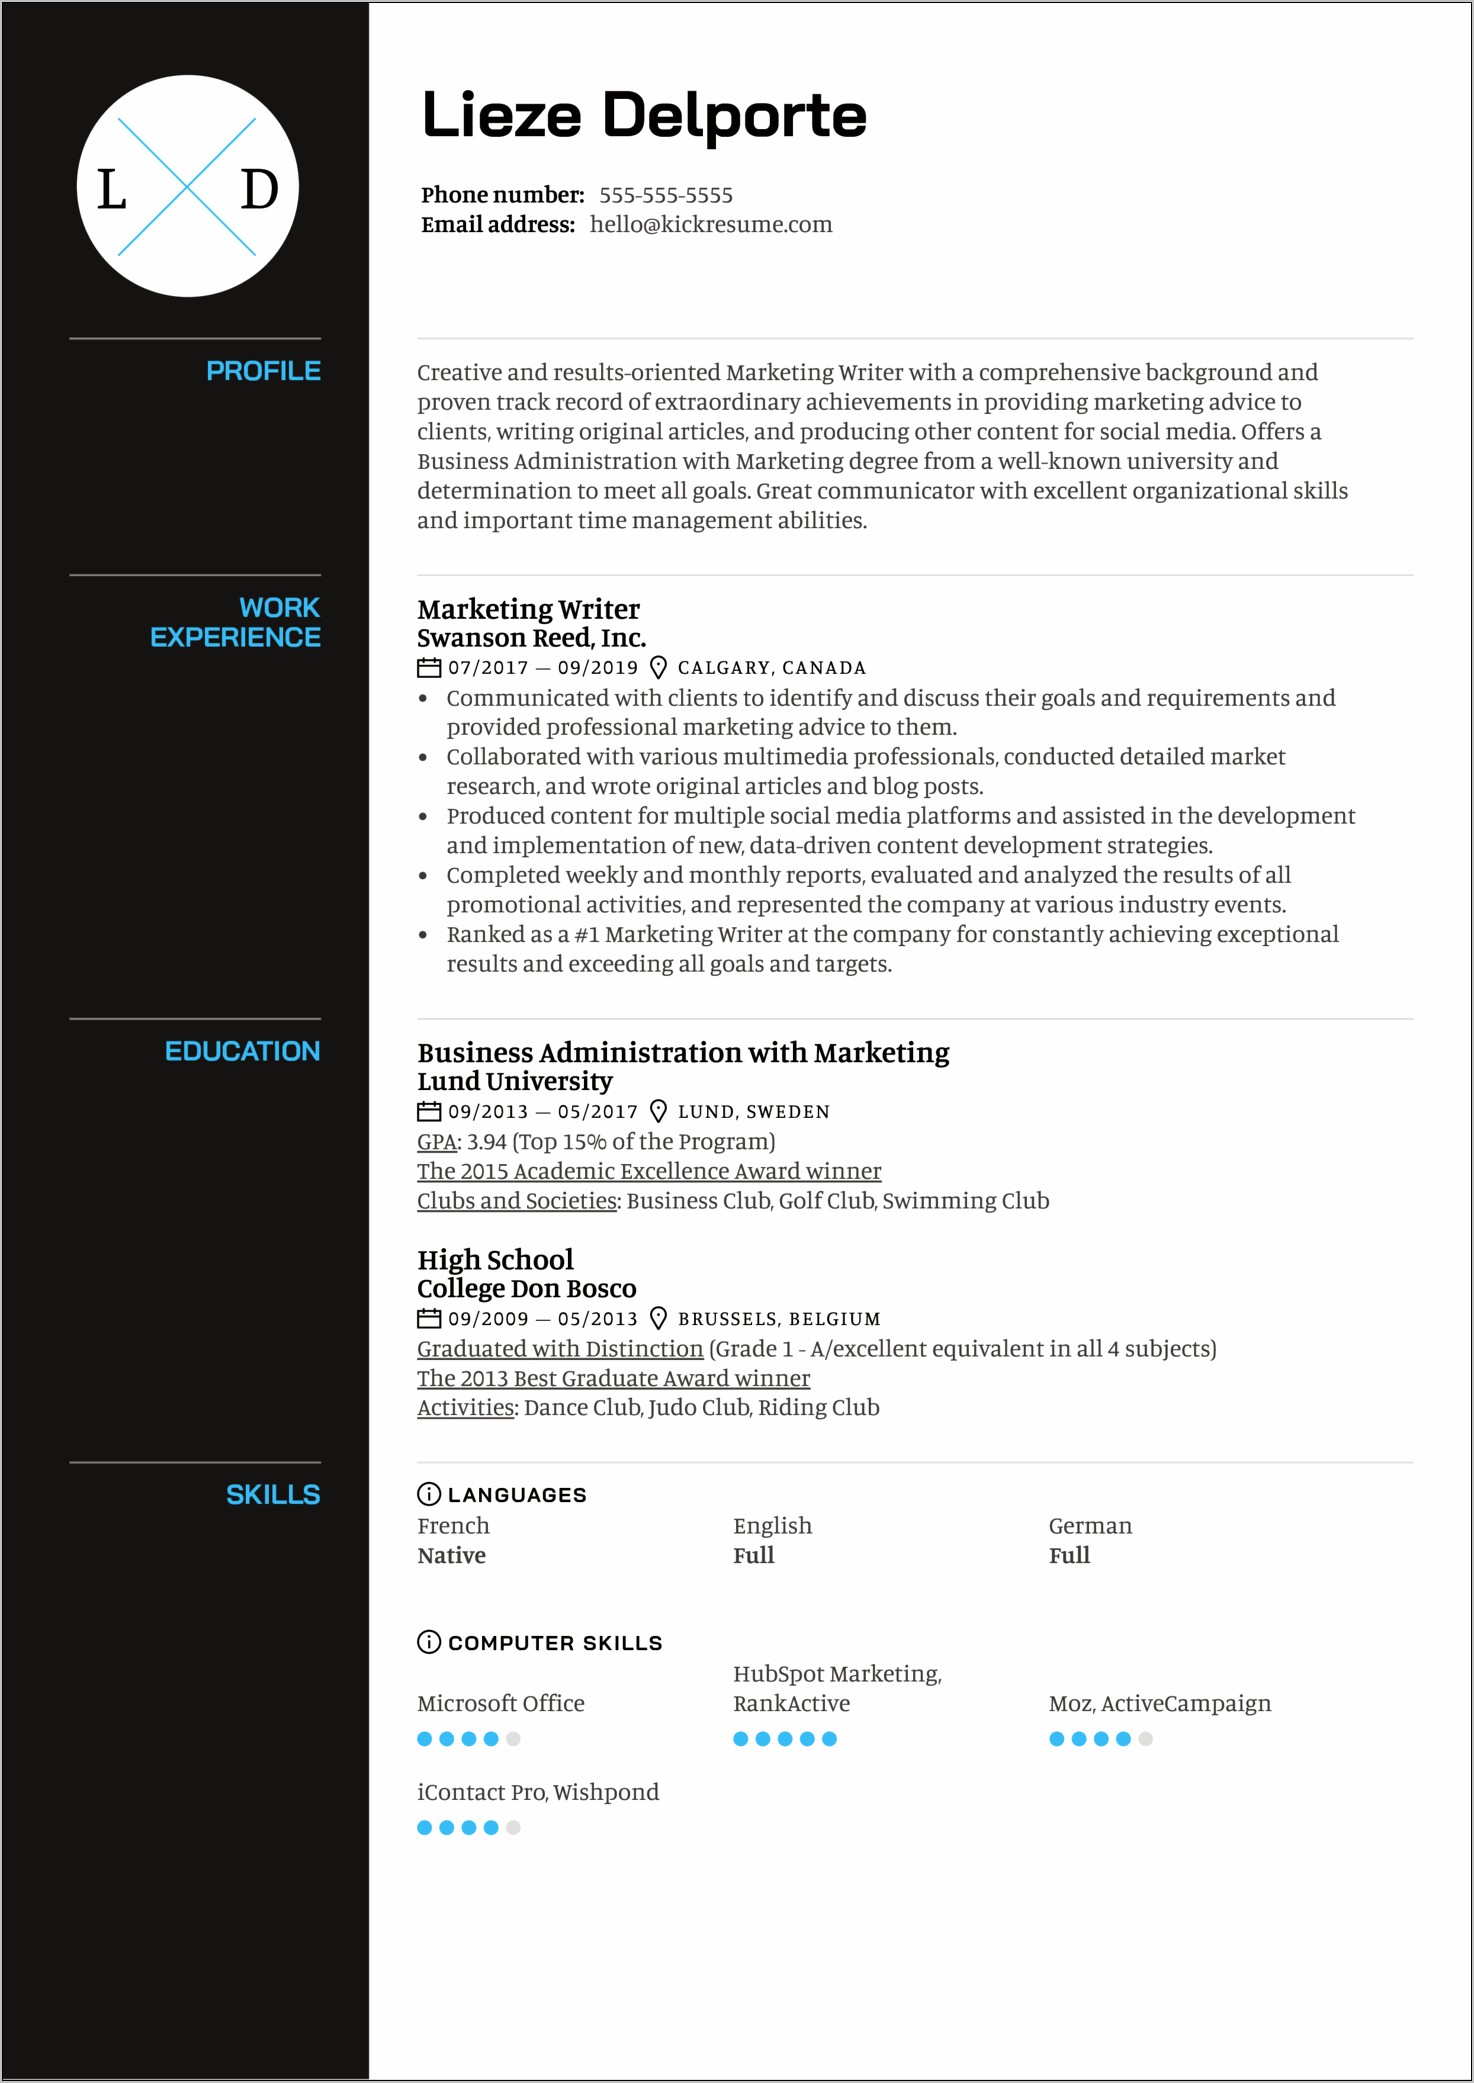 About Me In Creative Buisness Resume Sample